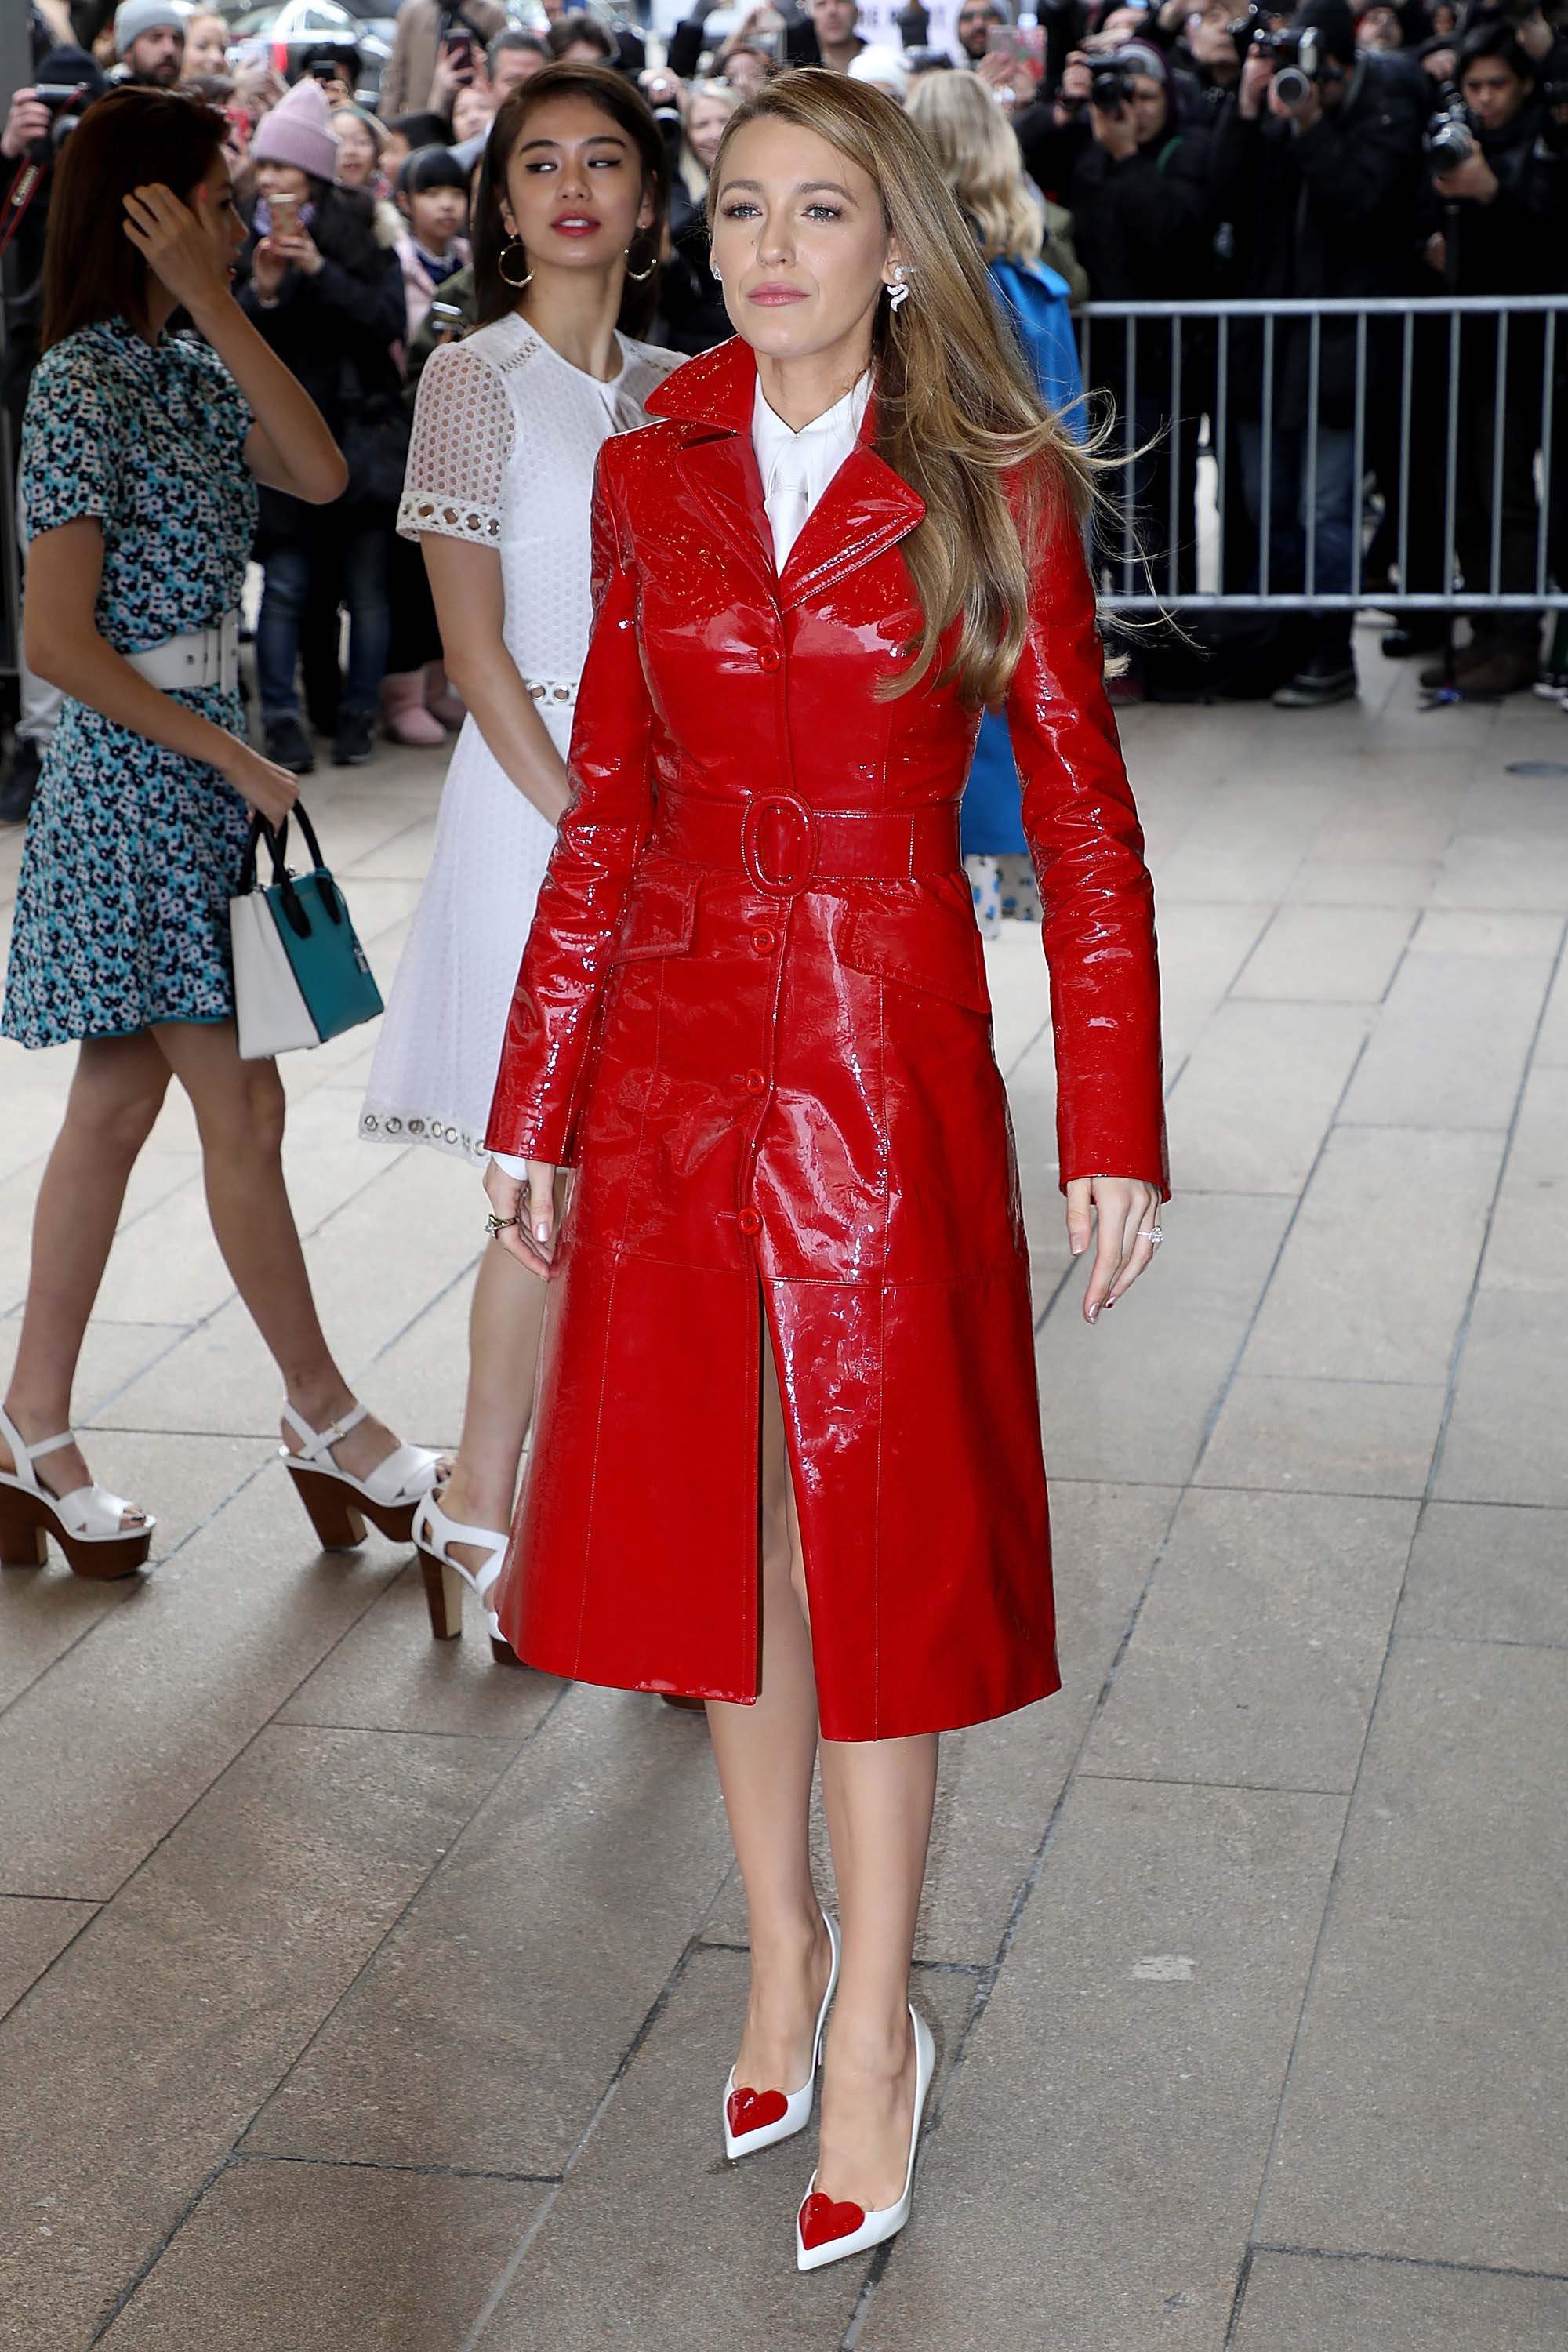 Blake Lively arrives at the Michael Kors show